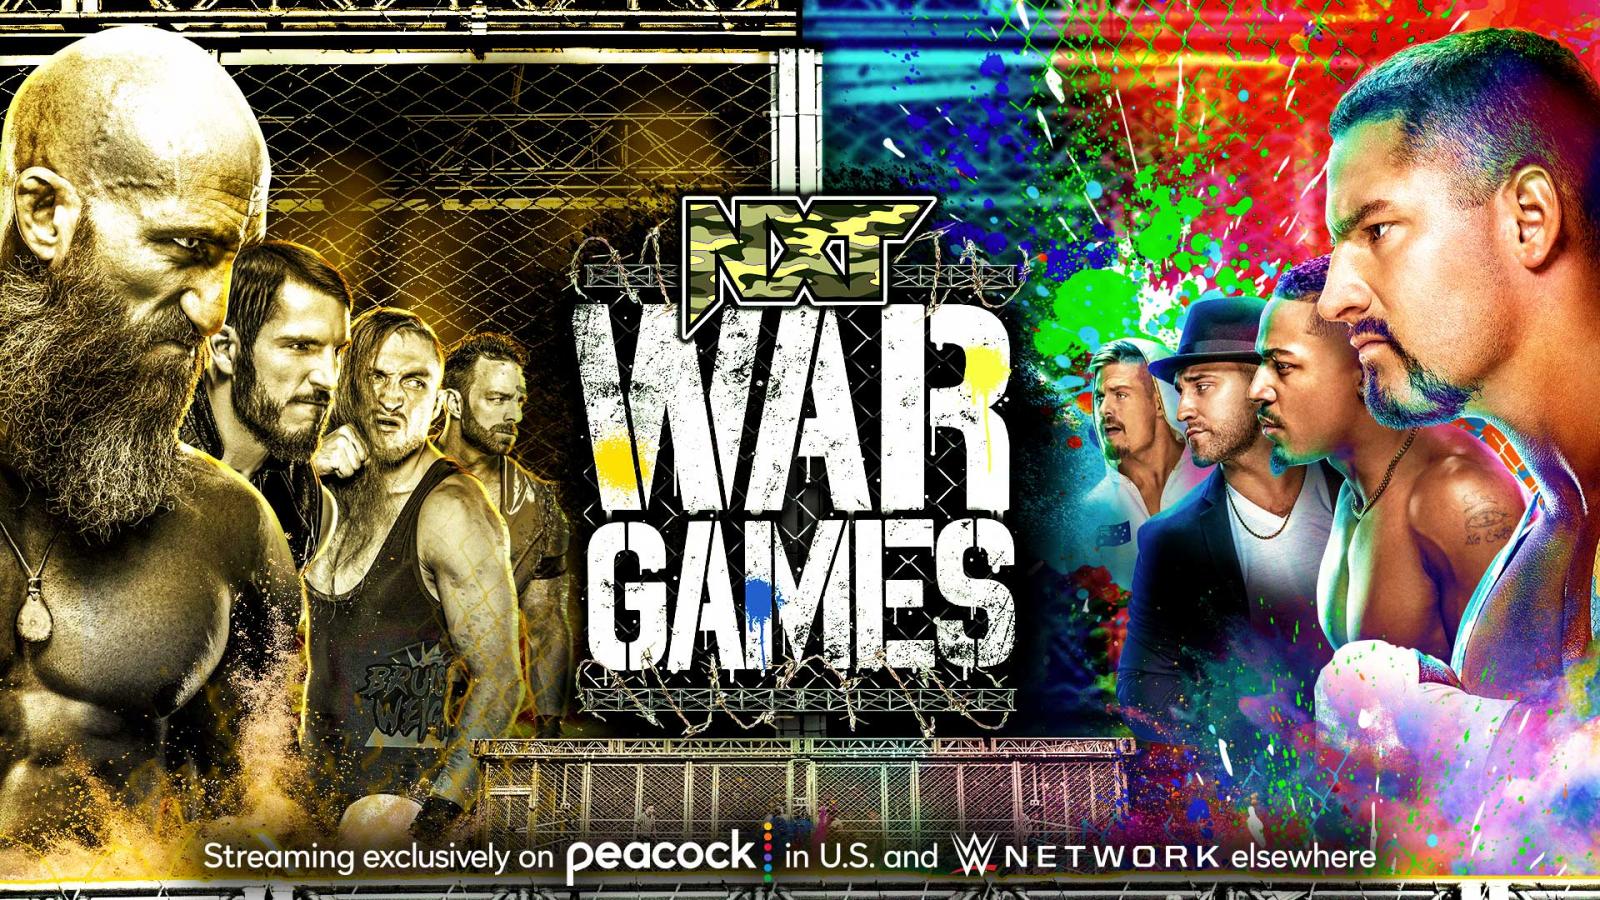 NXT WarGames Card for This Sunday Five Matches Announced TPWW